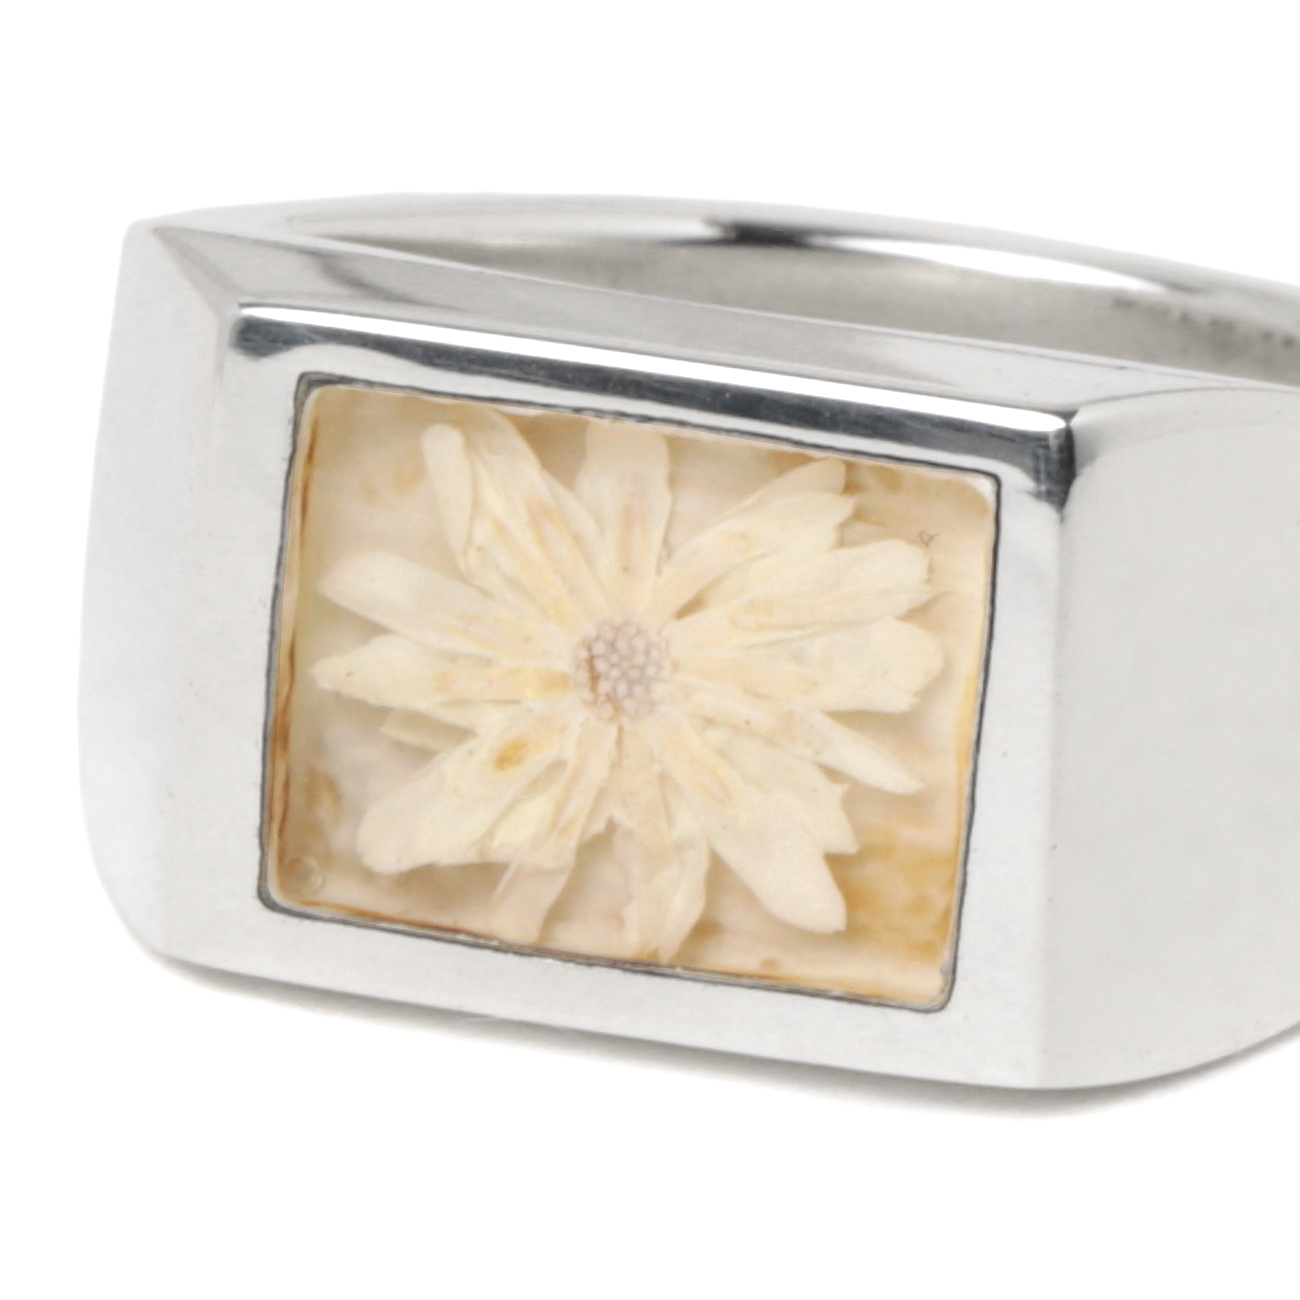 Signet Ring with Flower / White - Silver 925